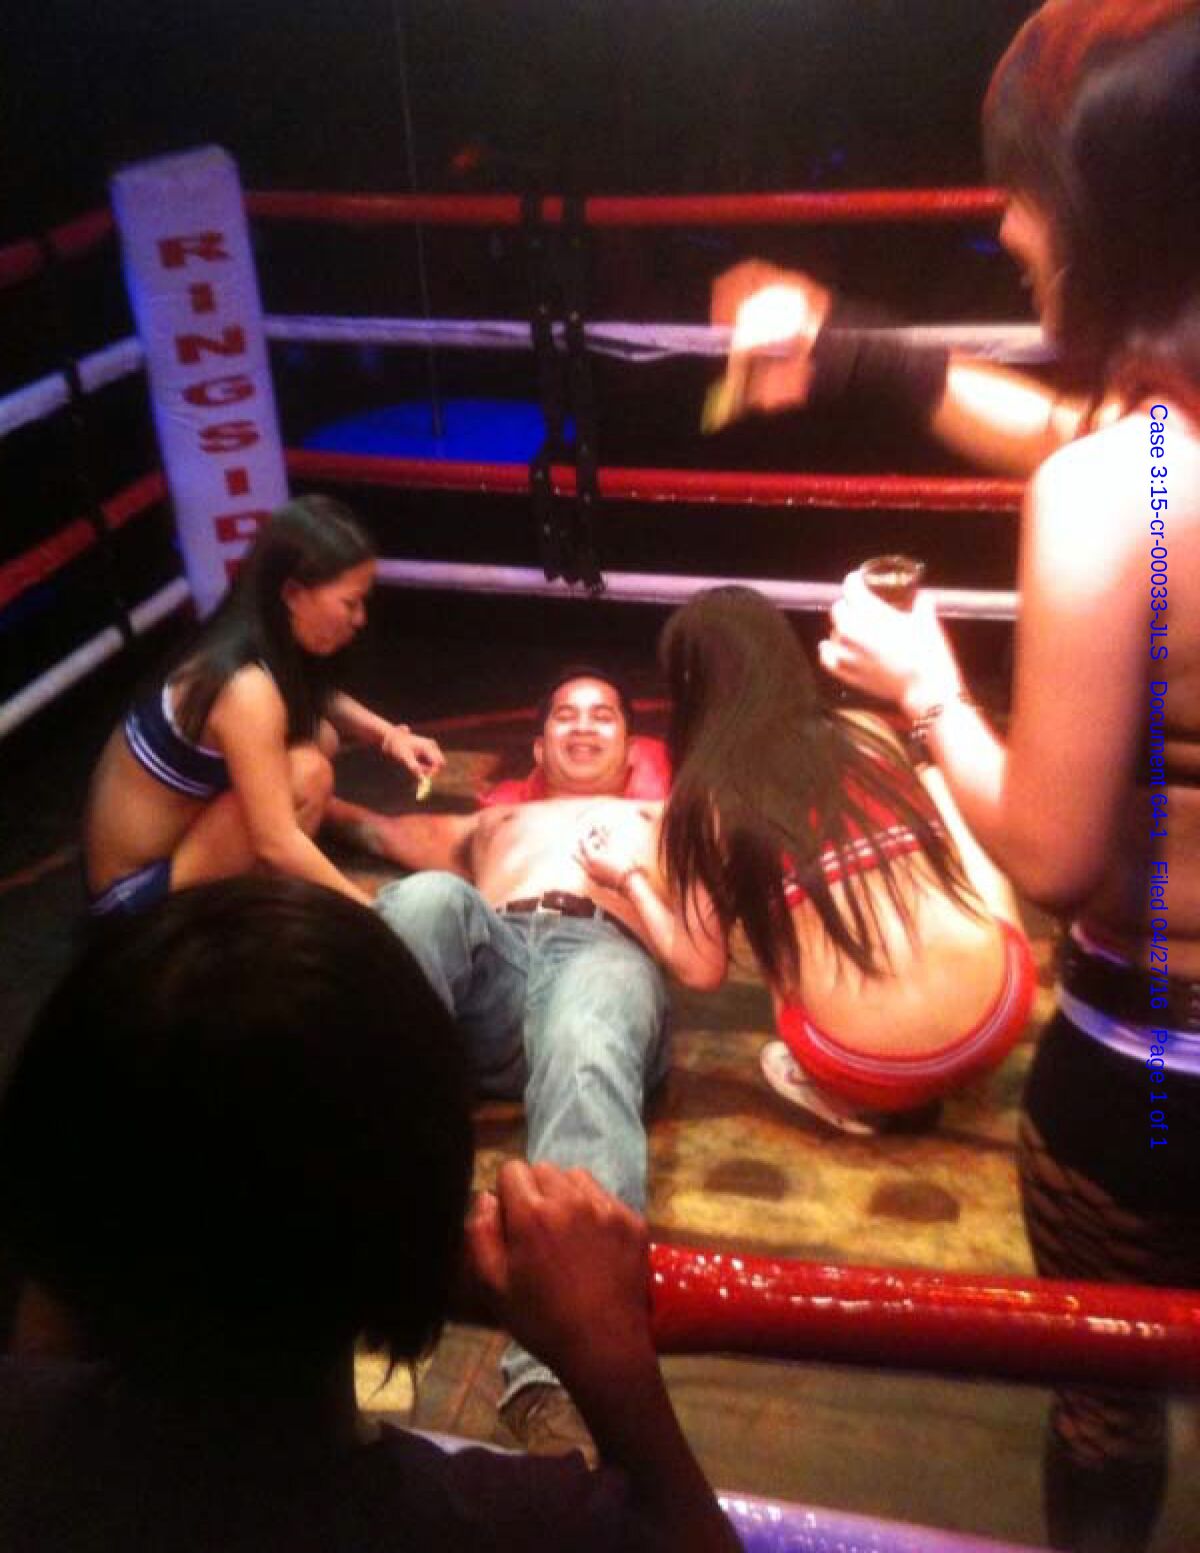 Former Navy Cmdr. Michael Misiewicz, center, lies flat on his back in a boxing ring